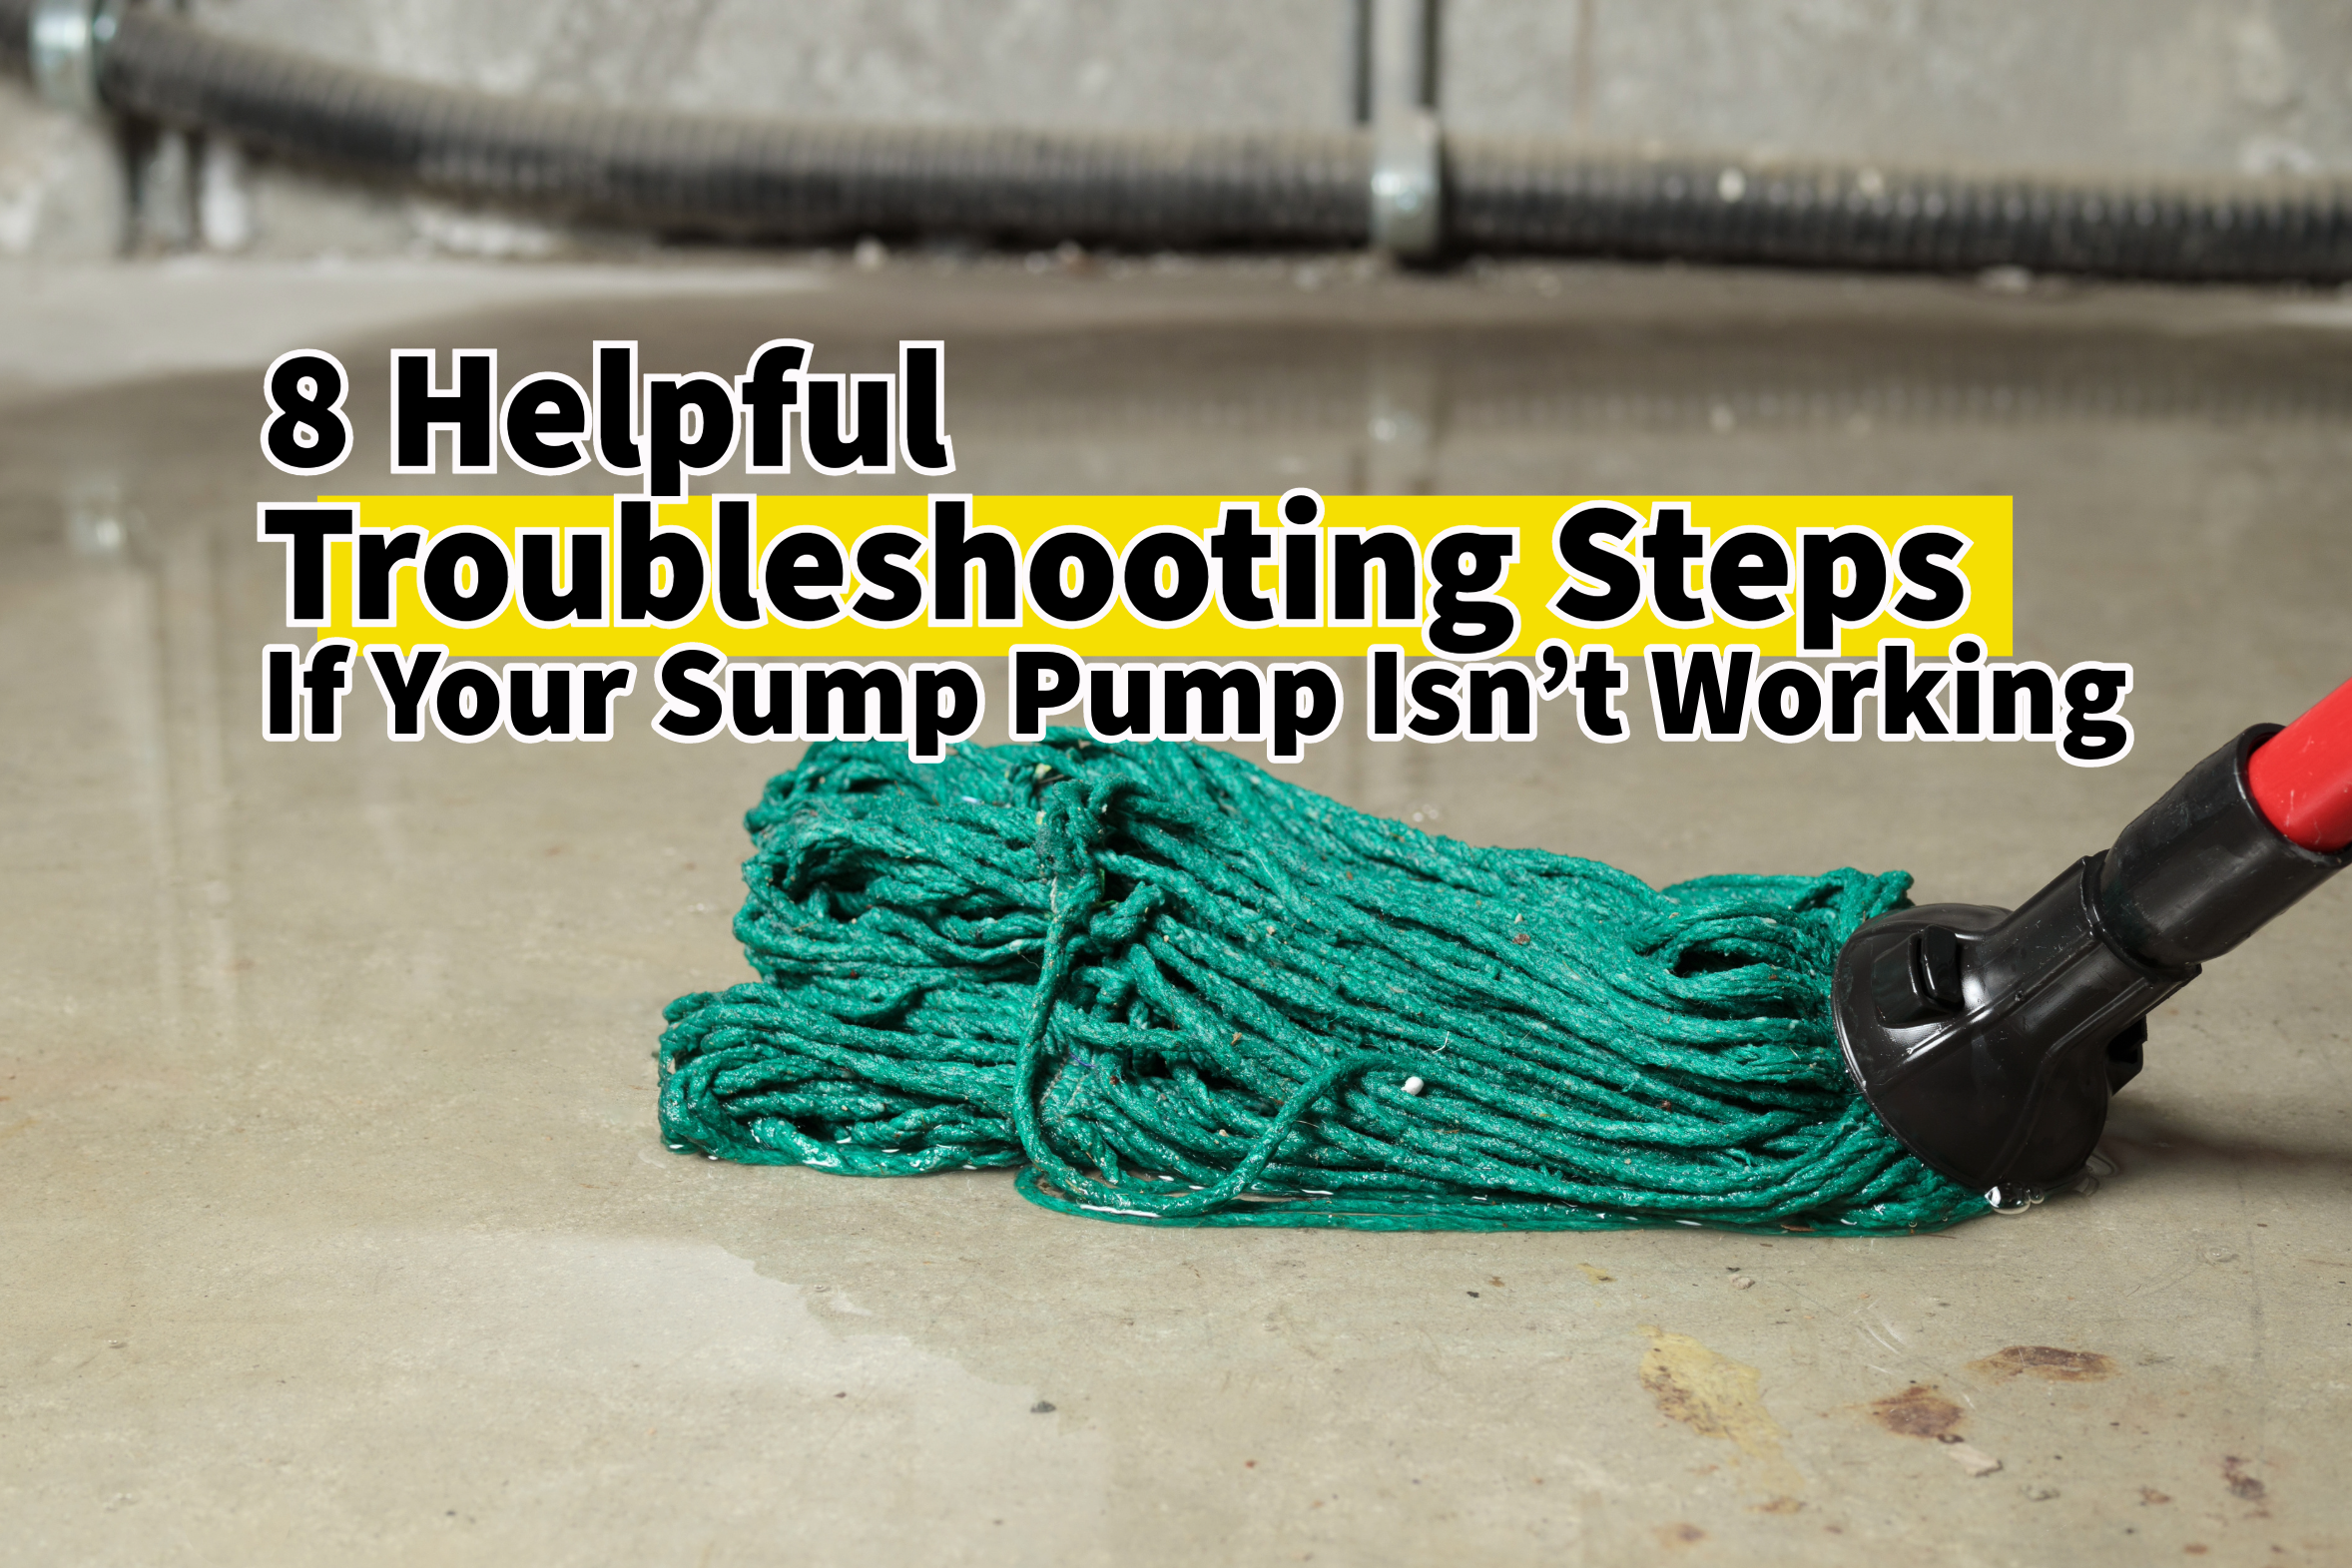 A homeowner's guide to troubleshooting a malfunctioning sump pump. Plumbing and drain services in Beavercreek, Ohio.